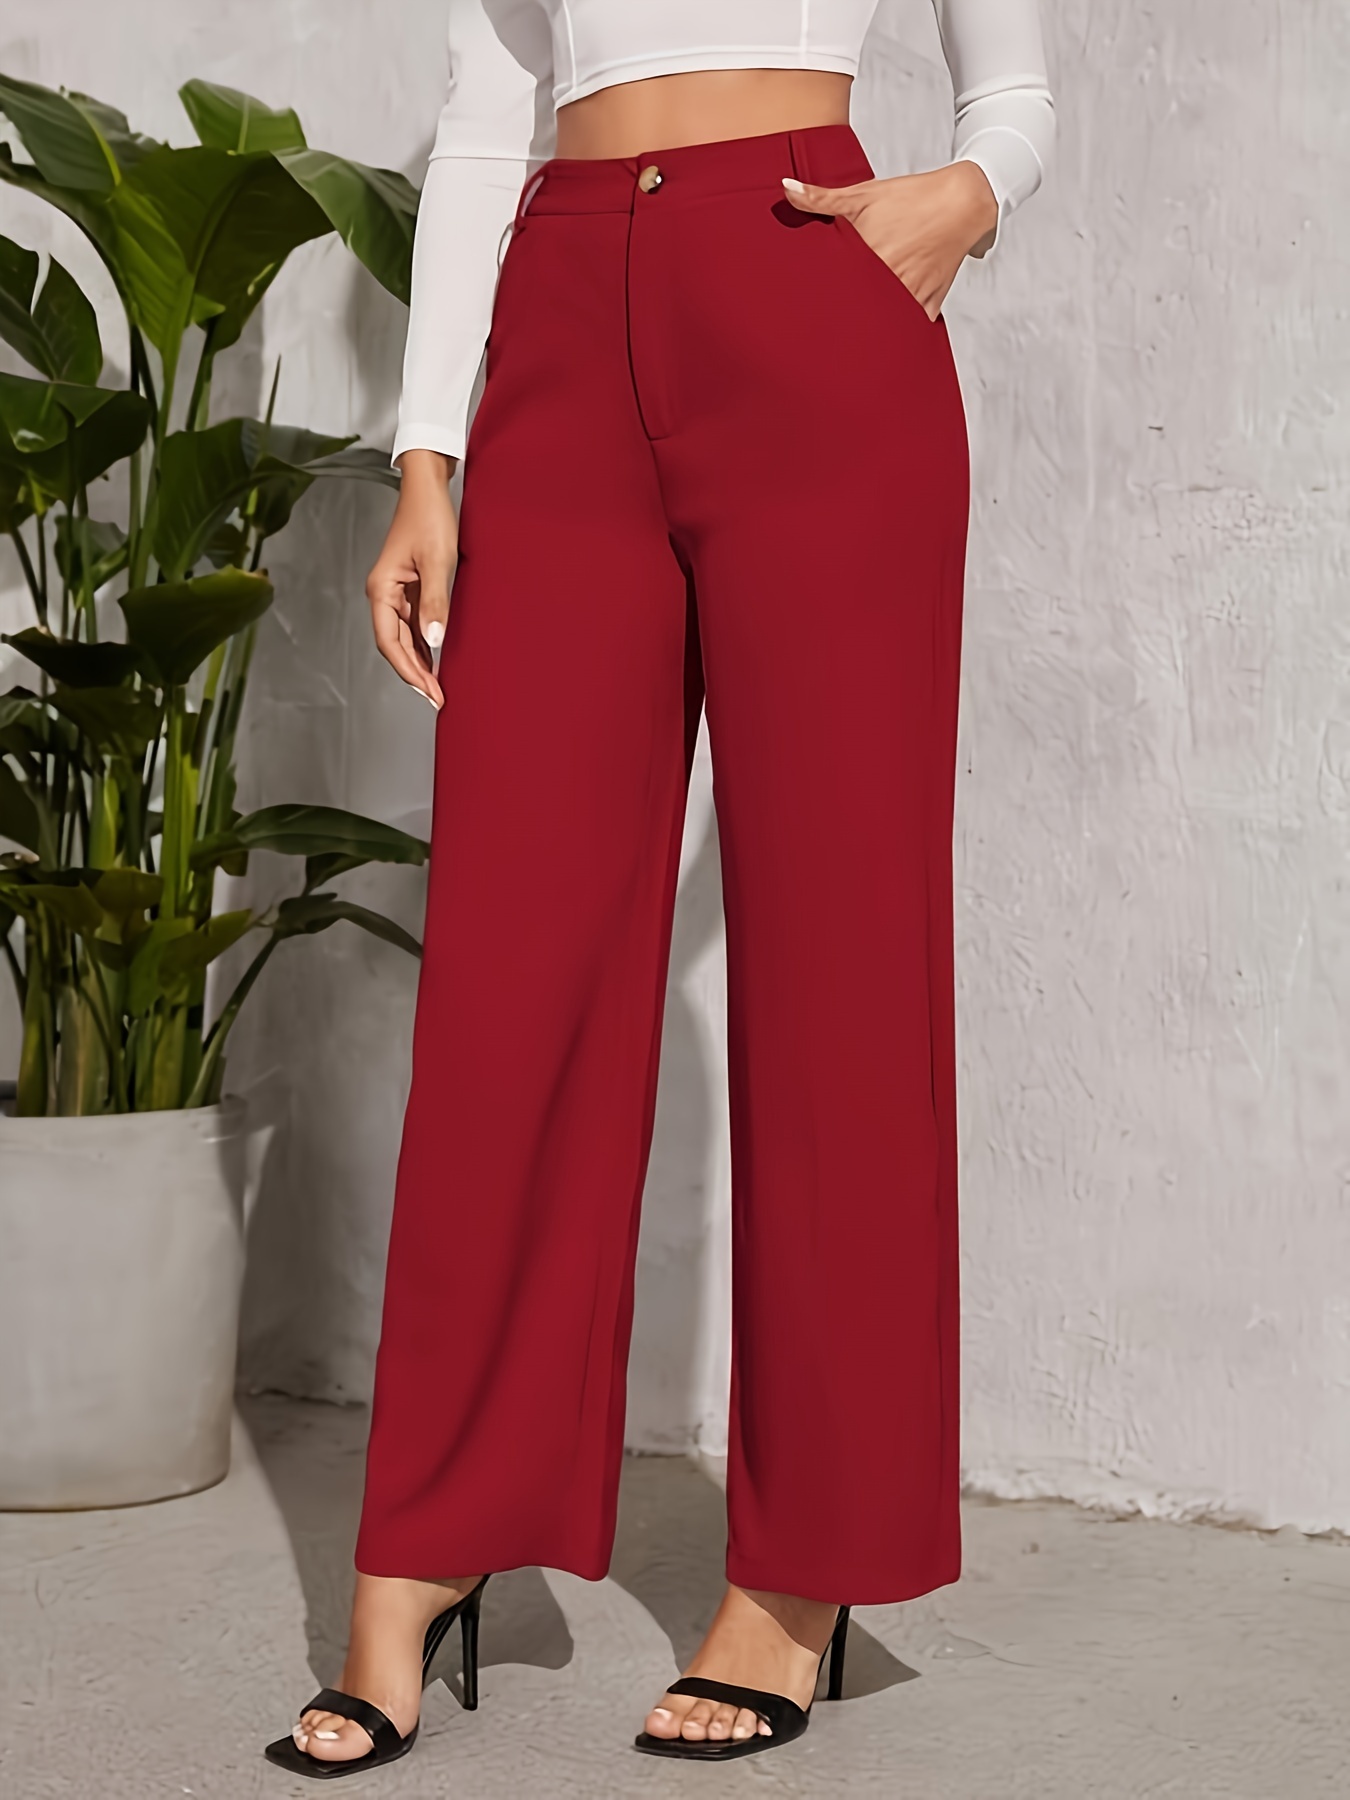 Solid Loose Straight Leg Pants, Elegant Suit Pants For Spring & Fall,  Women's Clothing